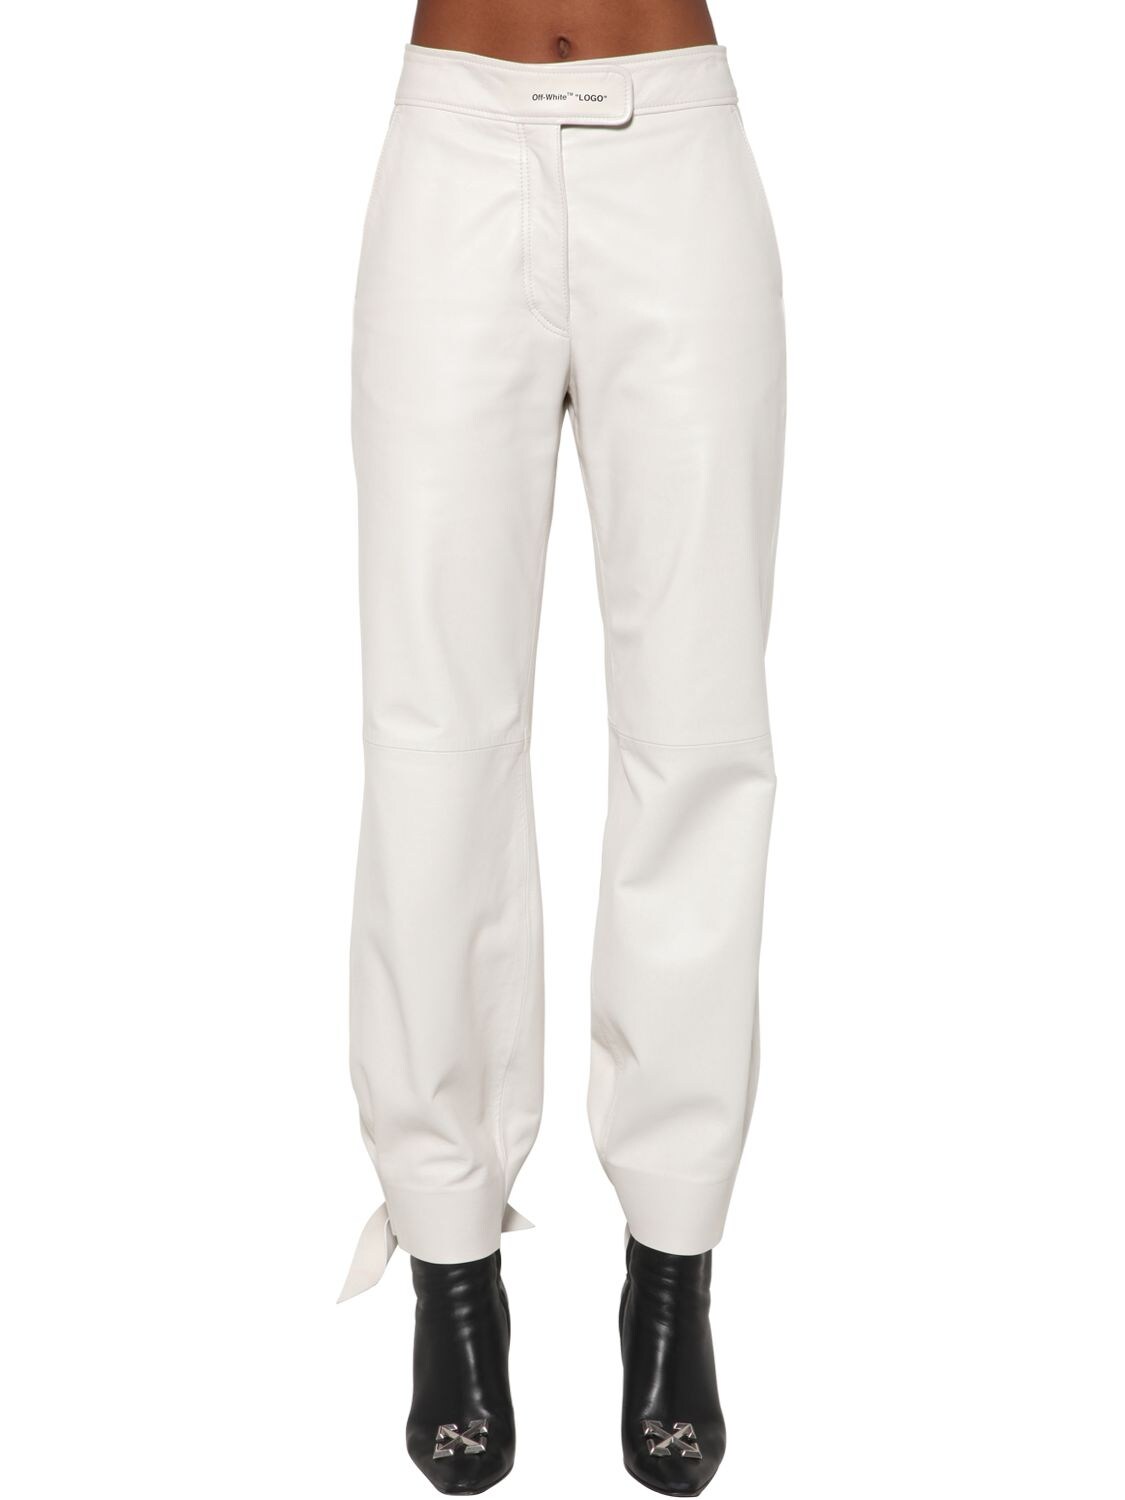 OFF-WHITE BAGGY LEATHER PANTS,70I4T8045-NDGWMA2